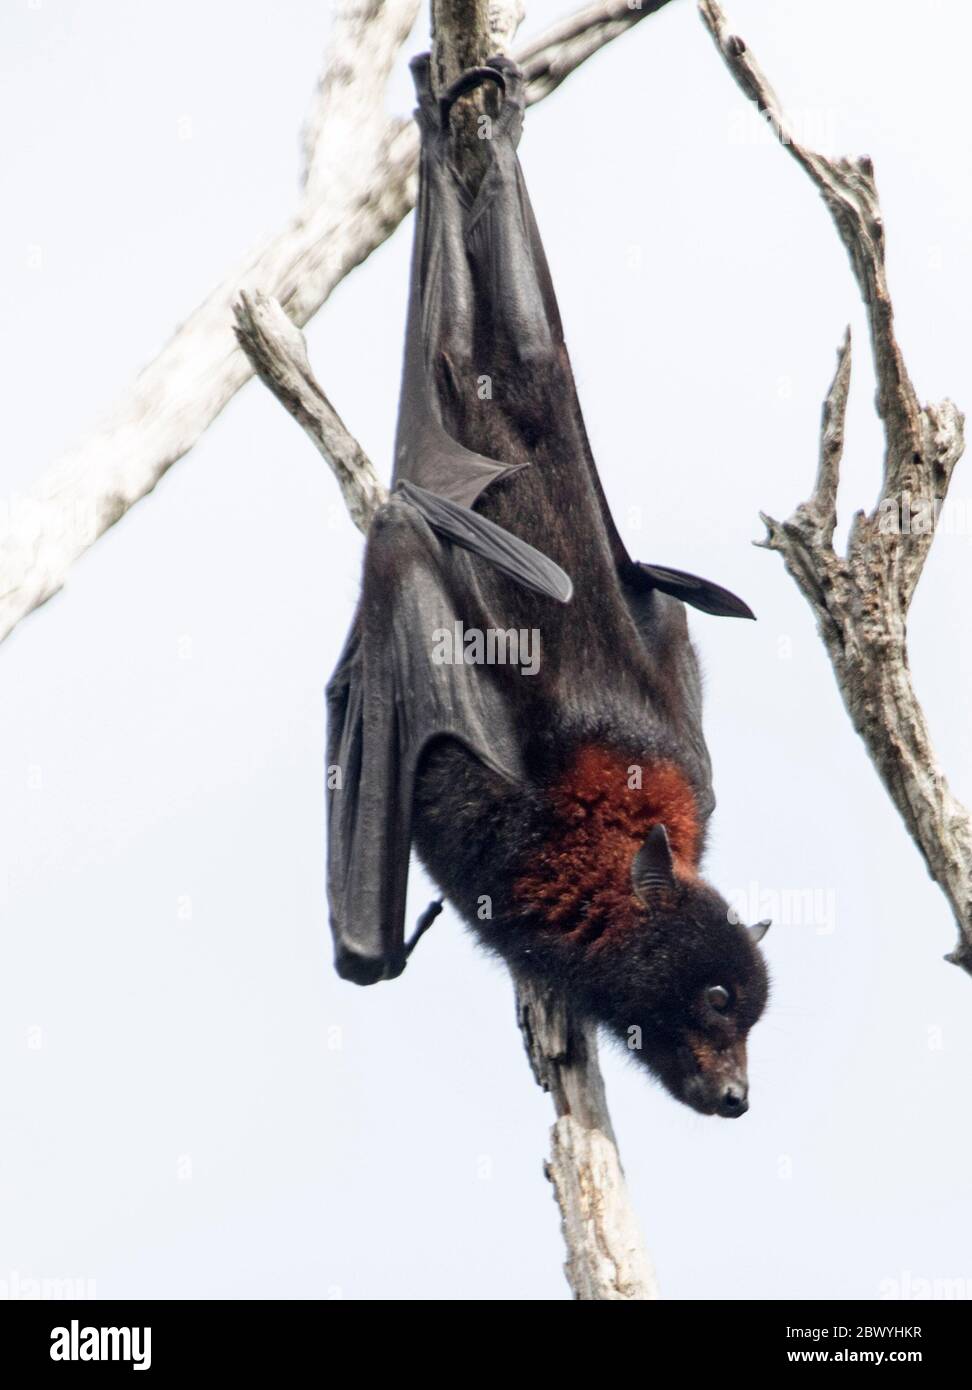 Australian grey-headed flying fox / fruit bat, Pteropus poliocephalus, hanging from branch of tree and against background of light sky Stock Photo